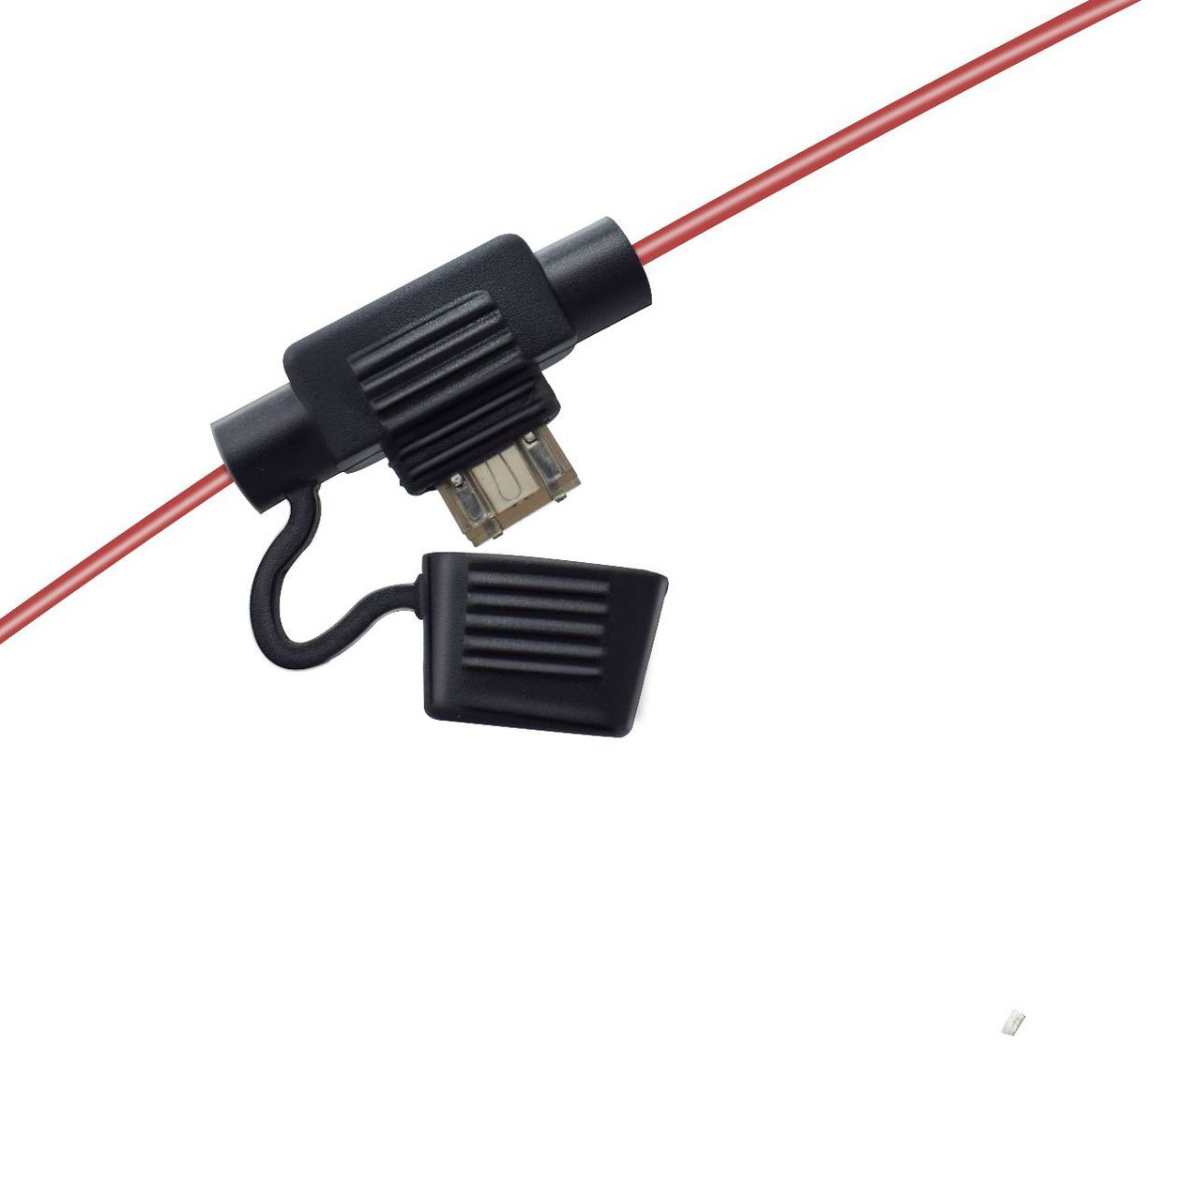 CLEARANCE! Universal Car Antenna Radio Practical FM Signal Amplifier  Anti-interference Universal FM Booster Amp Car